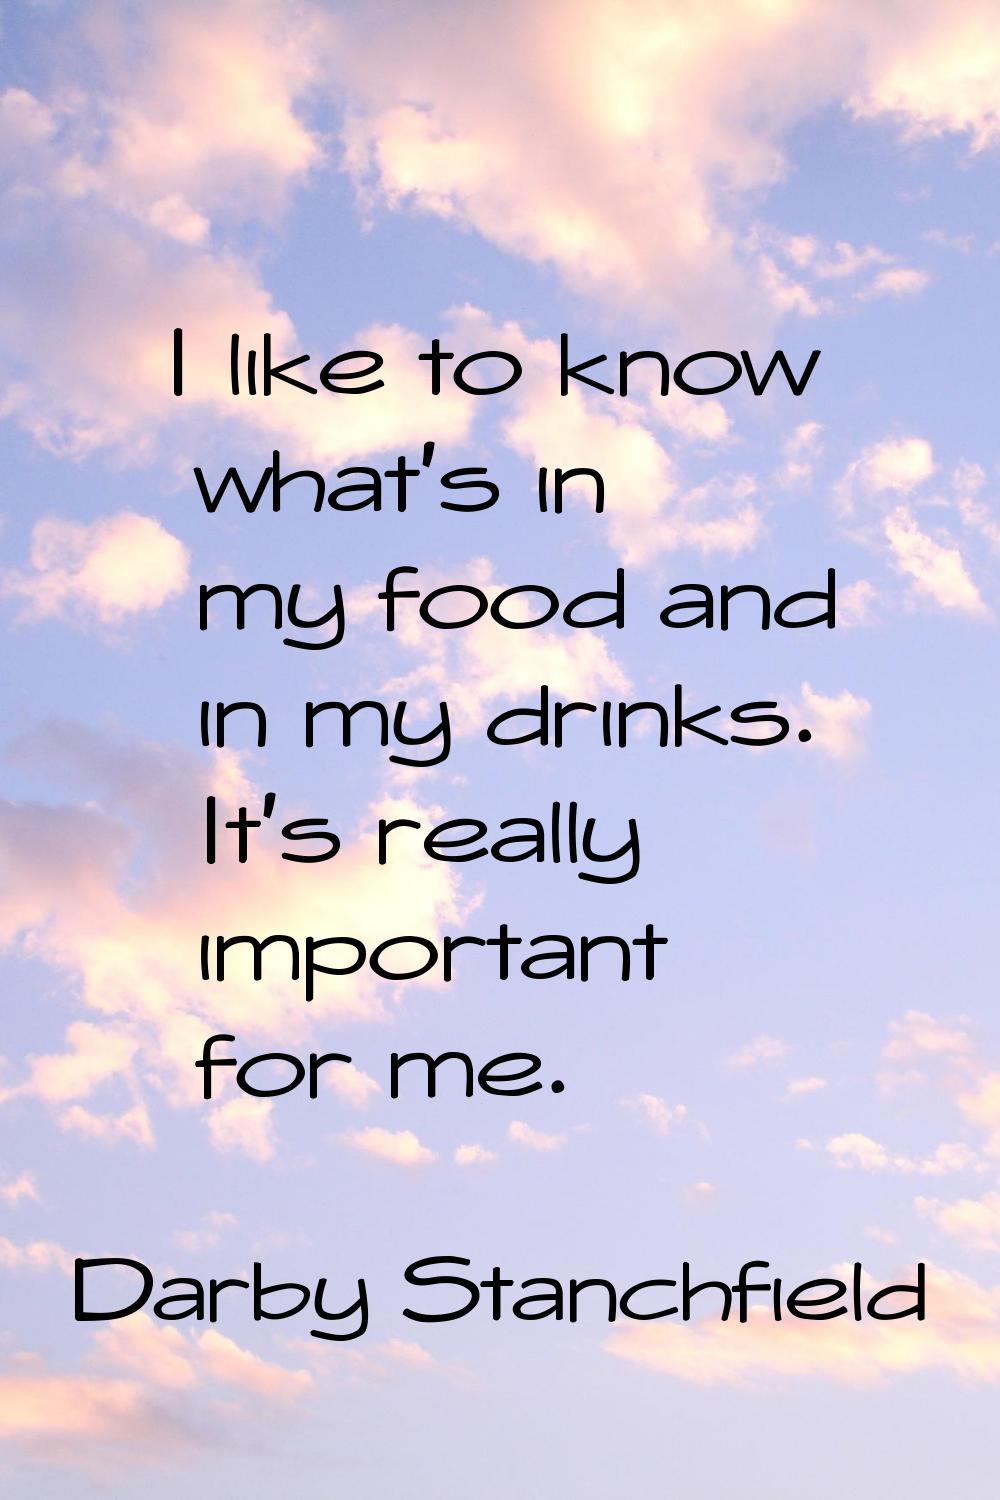 I like to know what's in my food and in my drinks. It's really important for me.